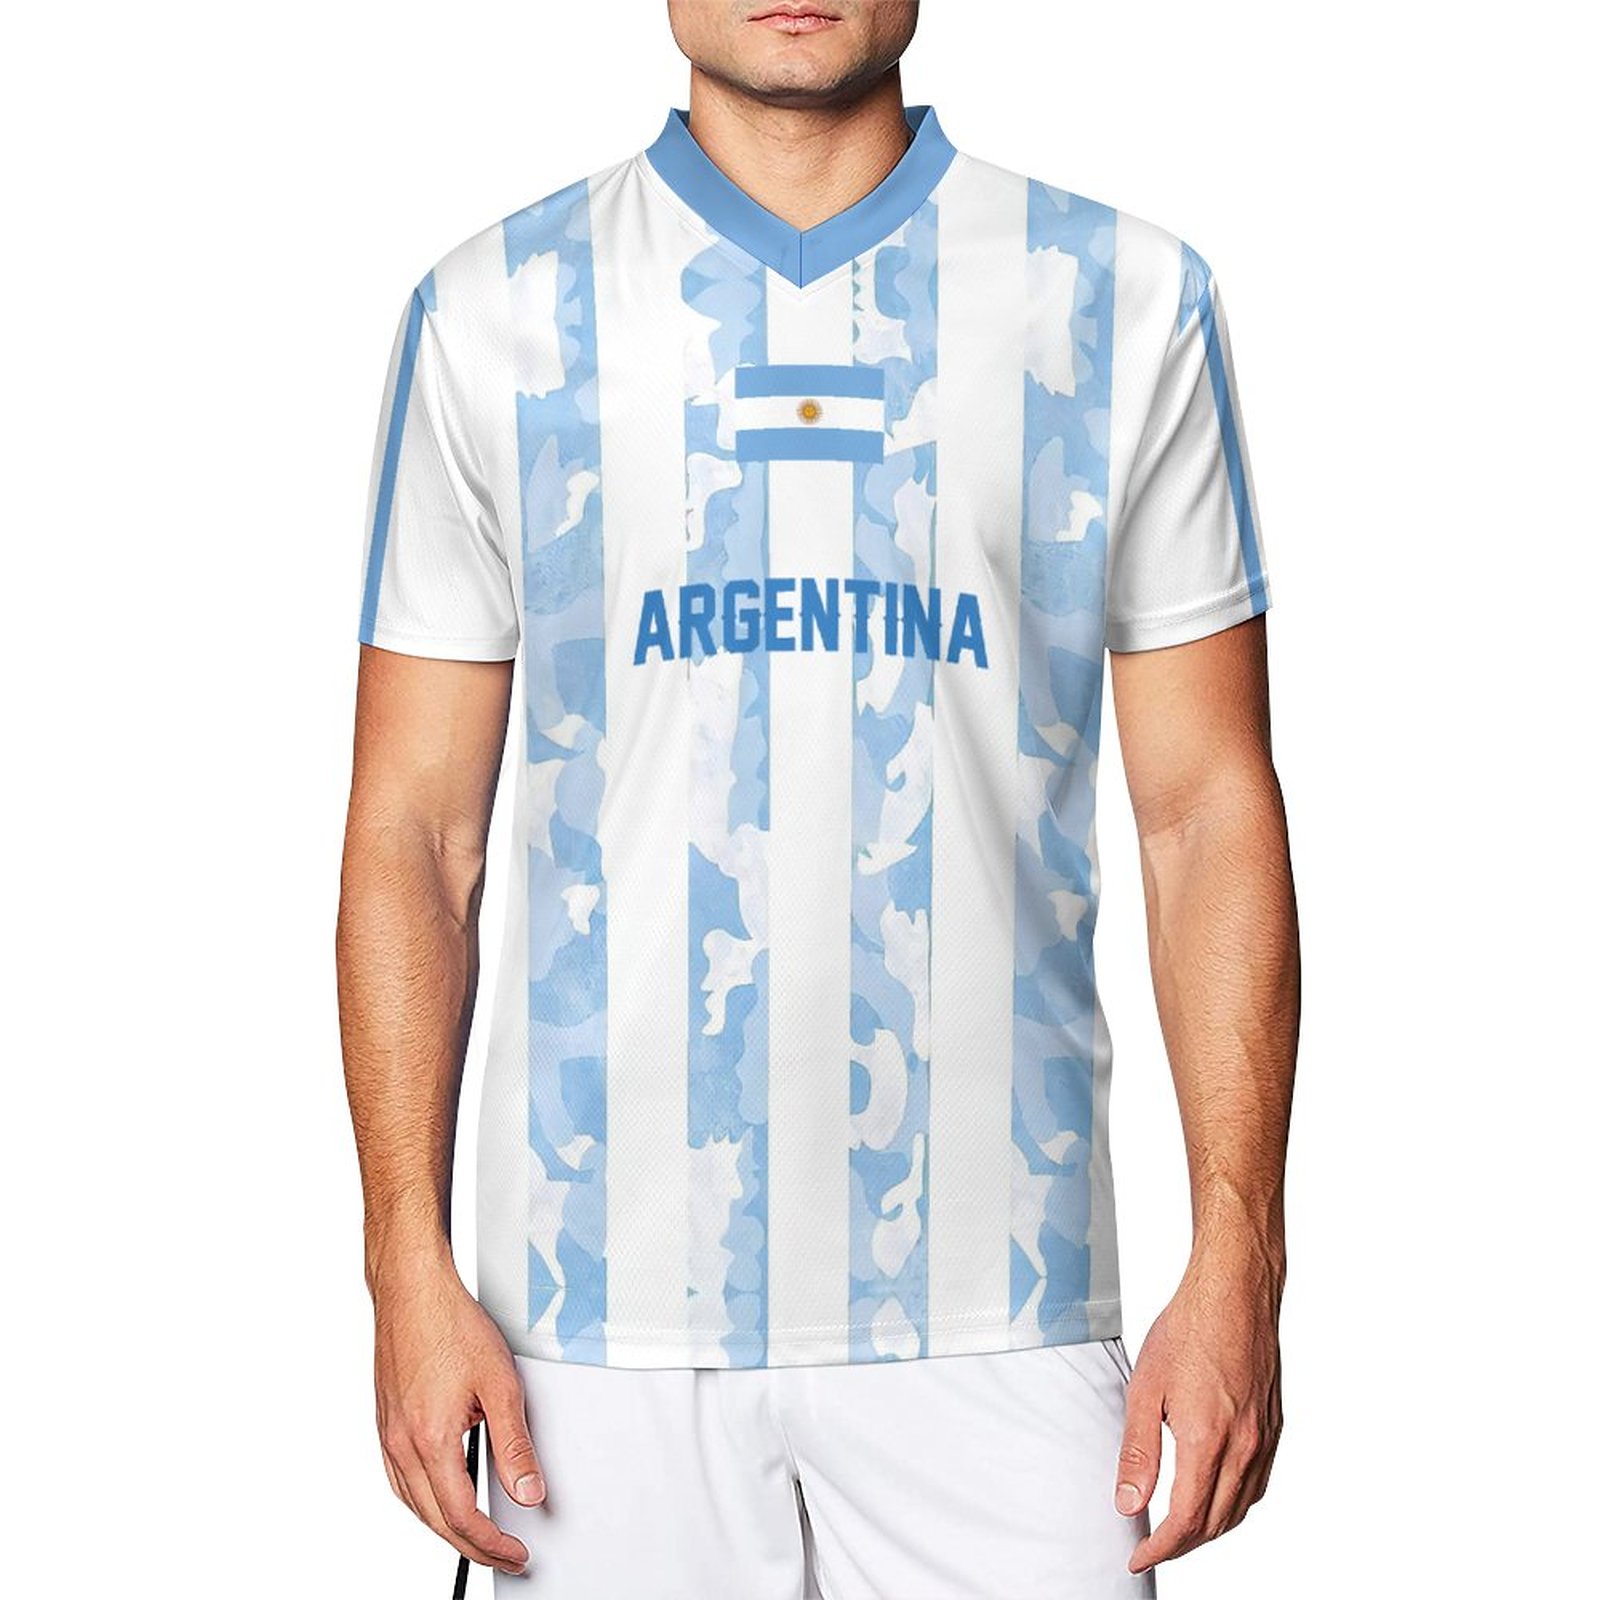 Argentina FIFA 2022 World Cup Men's Exclusive Design Soccer Jersey